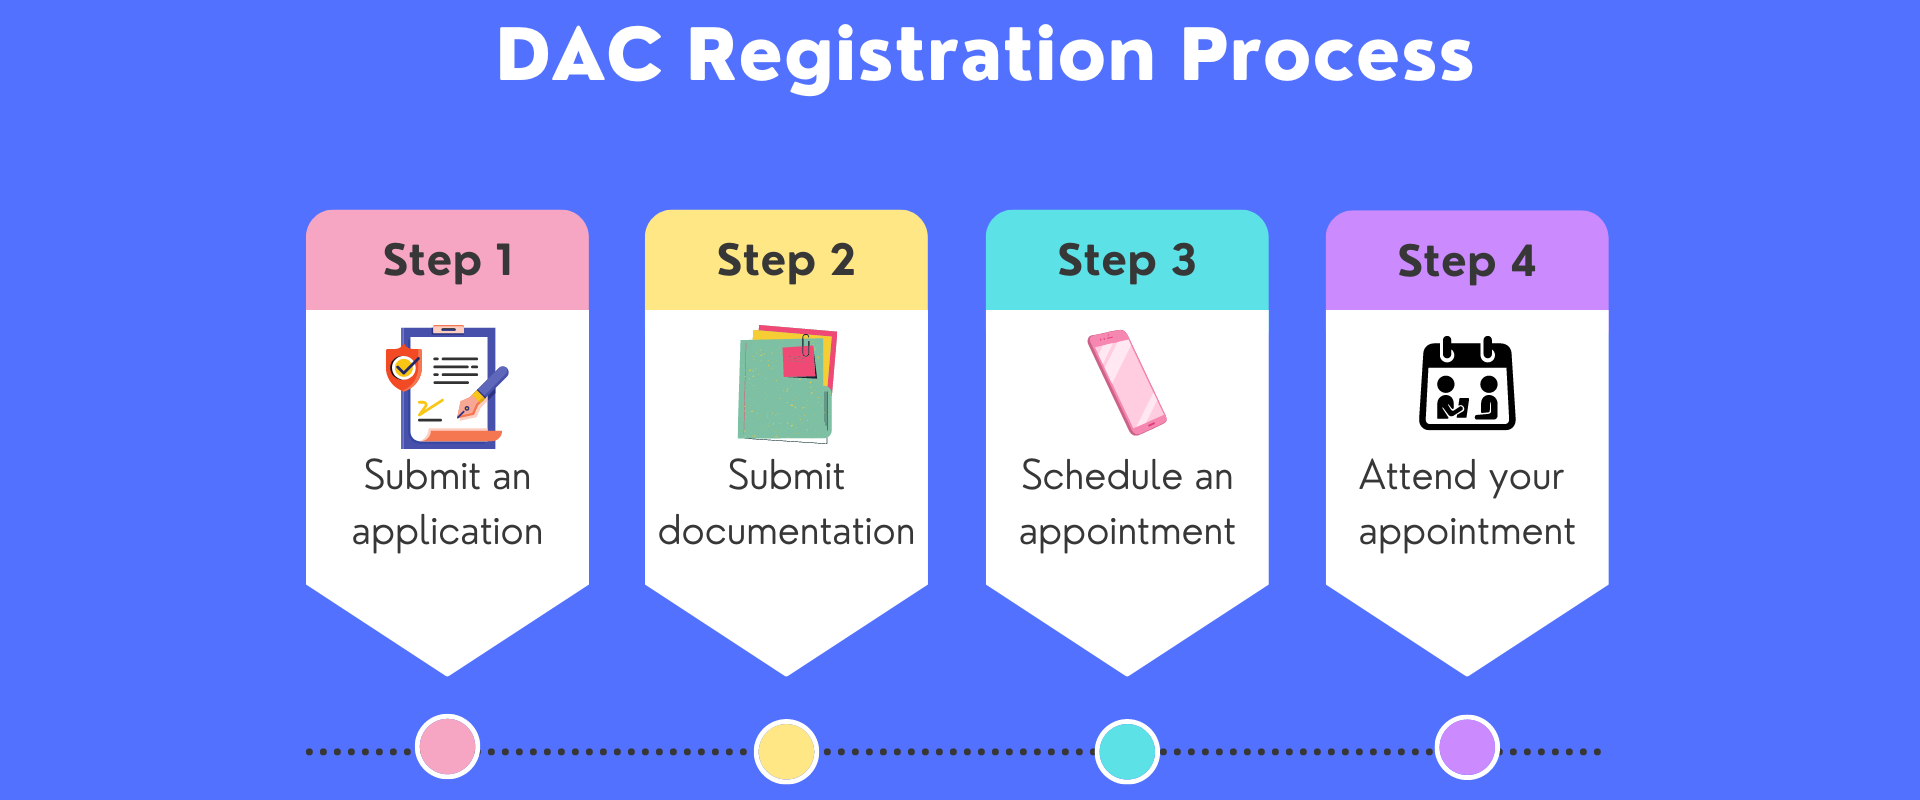 DAC Registration Process infographic, with images representing each step. Full text available below, with additional details.